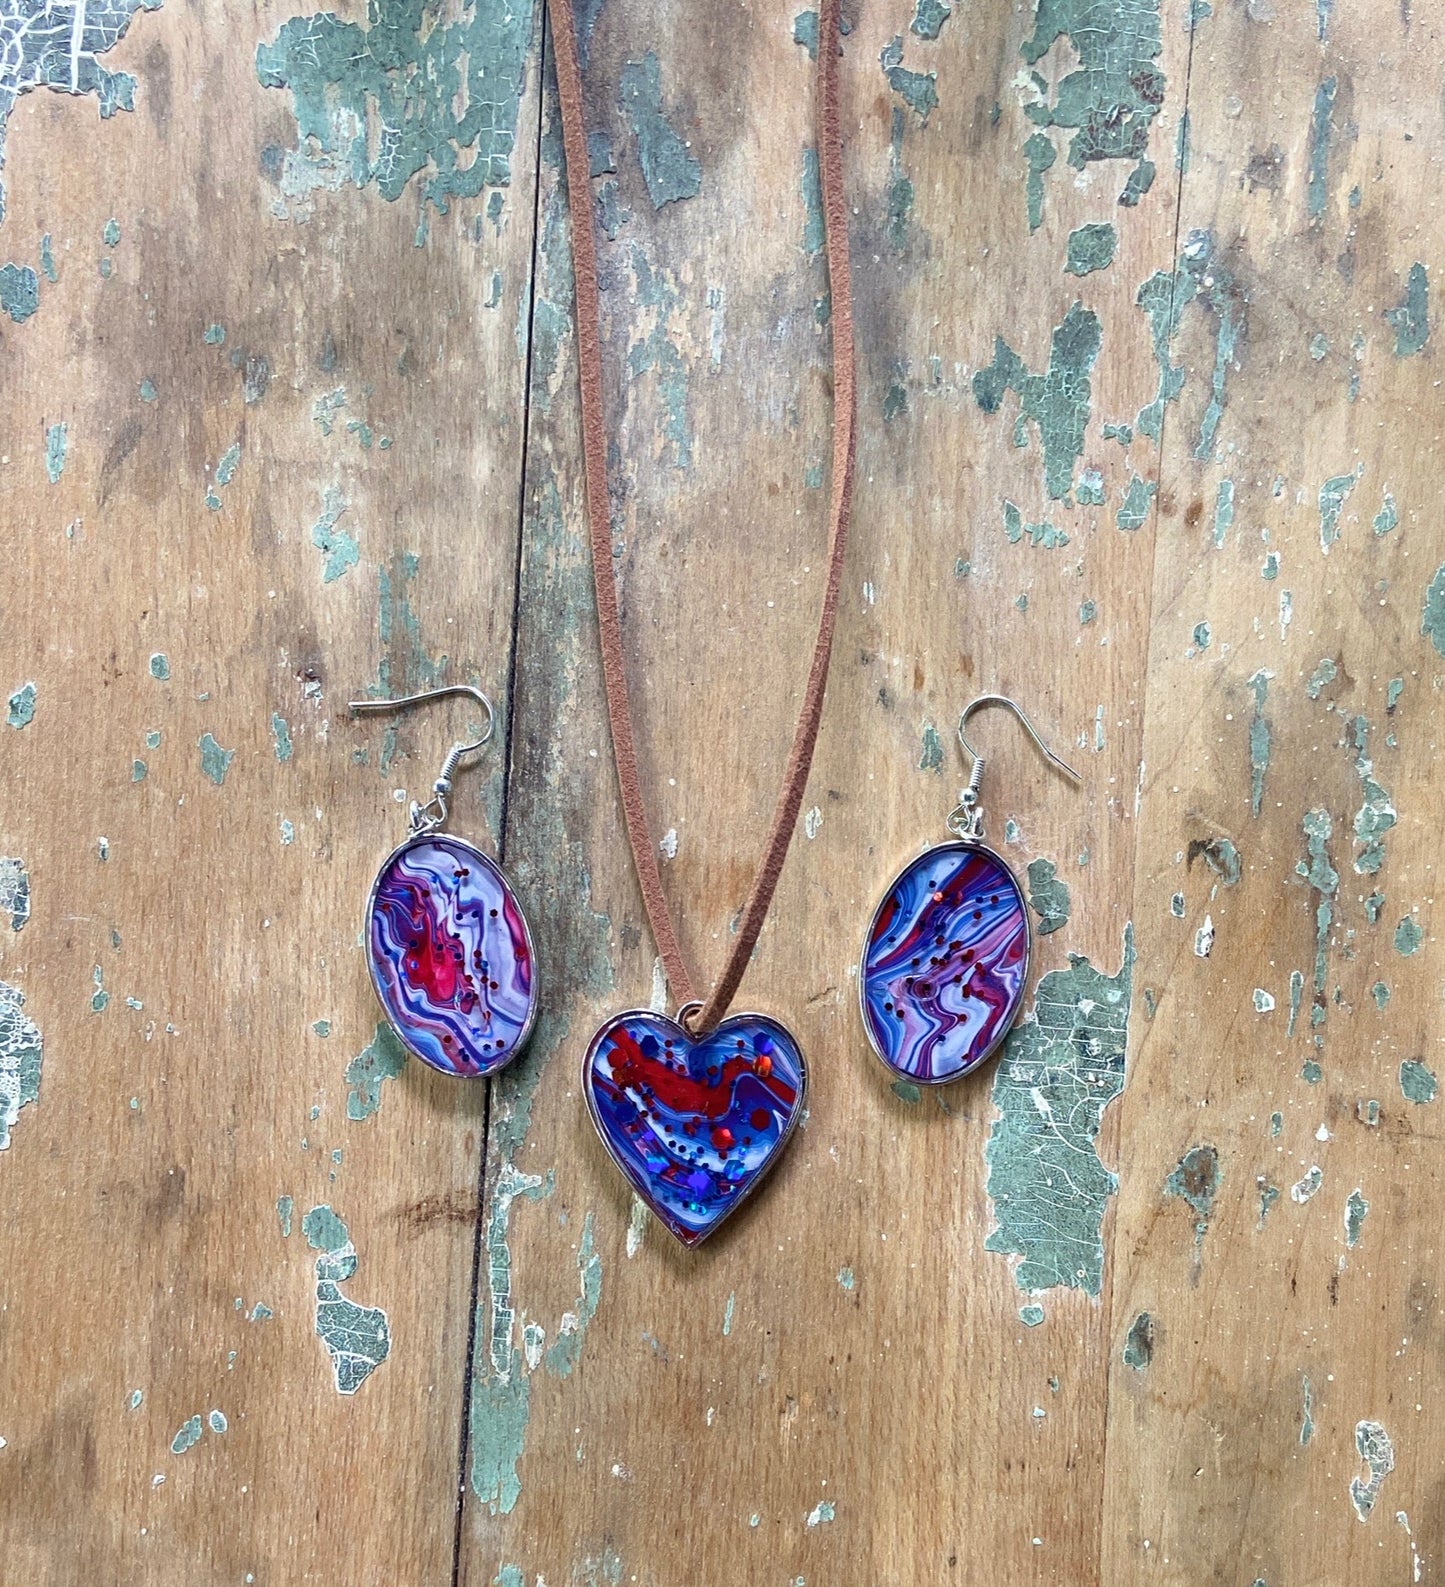 Resin Jewelry Workshop . Wednesday August 23 . Coyote Cafe